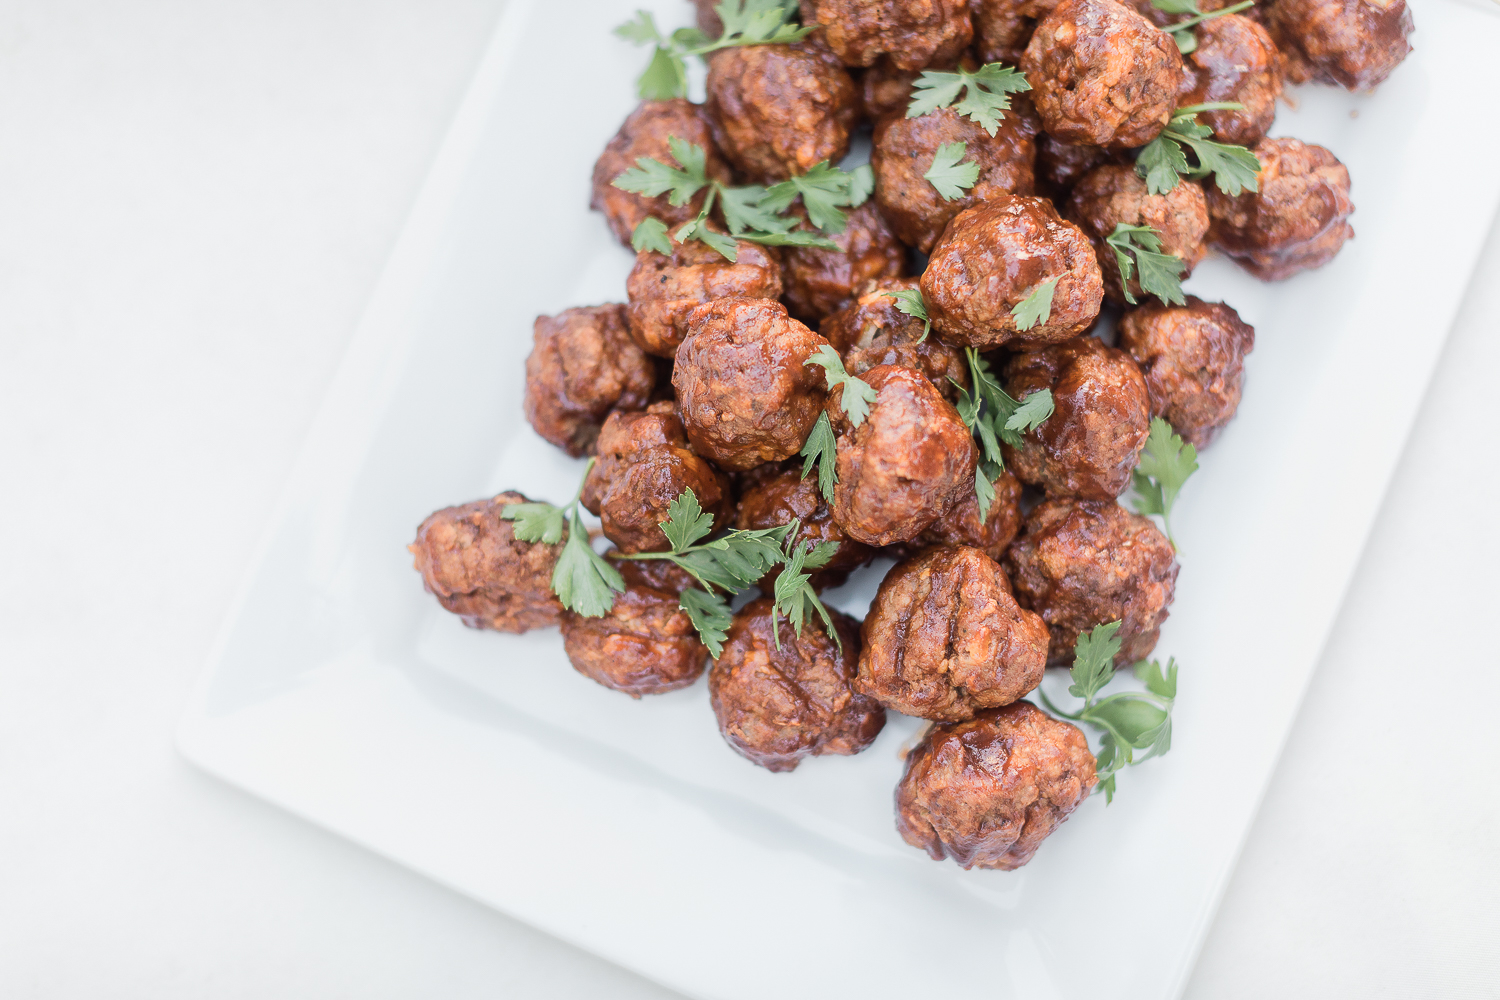 baked beef meatballs from game day cooked by blogger Stephanie Ziajka on Diary of a Debutante